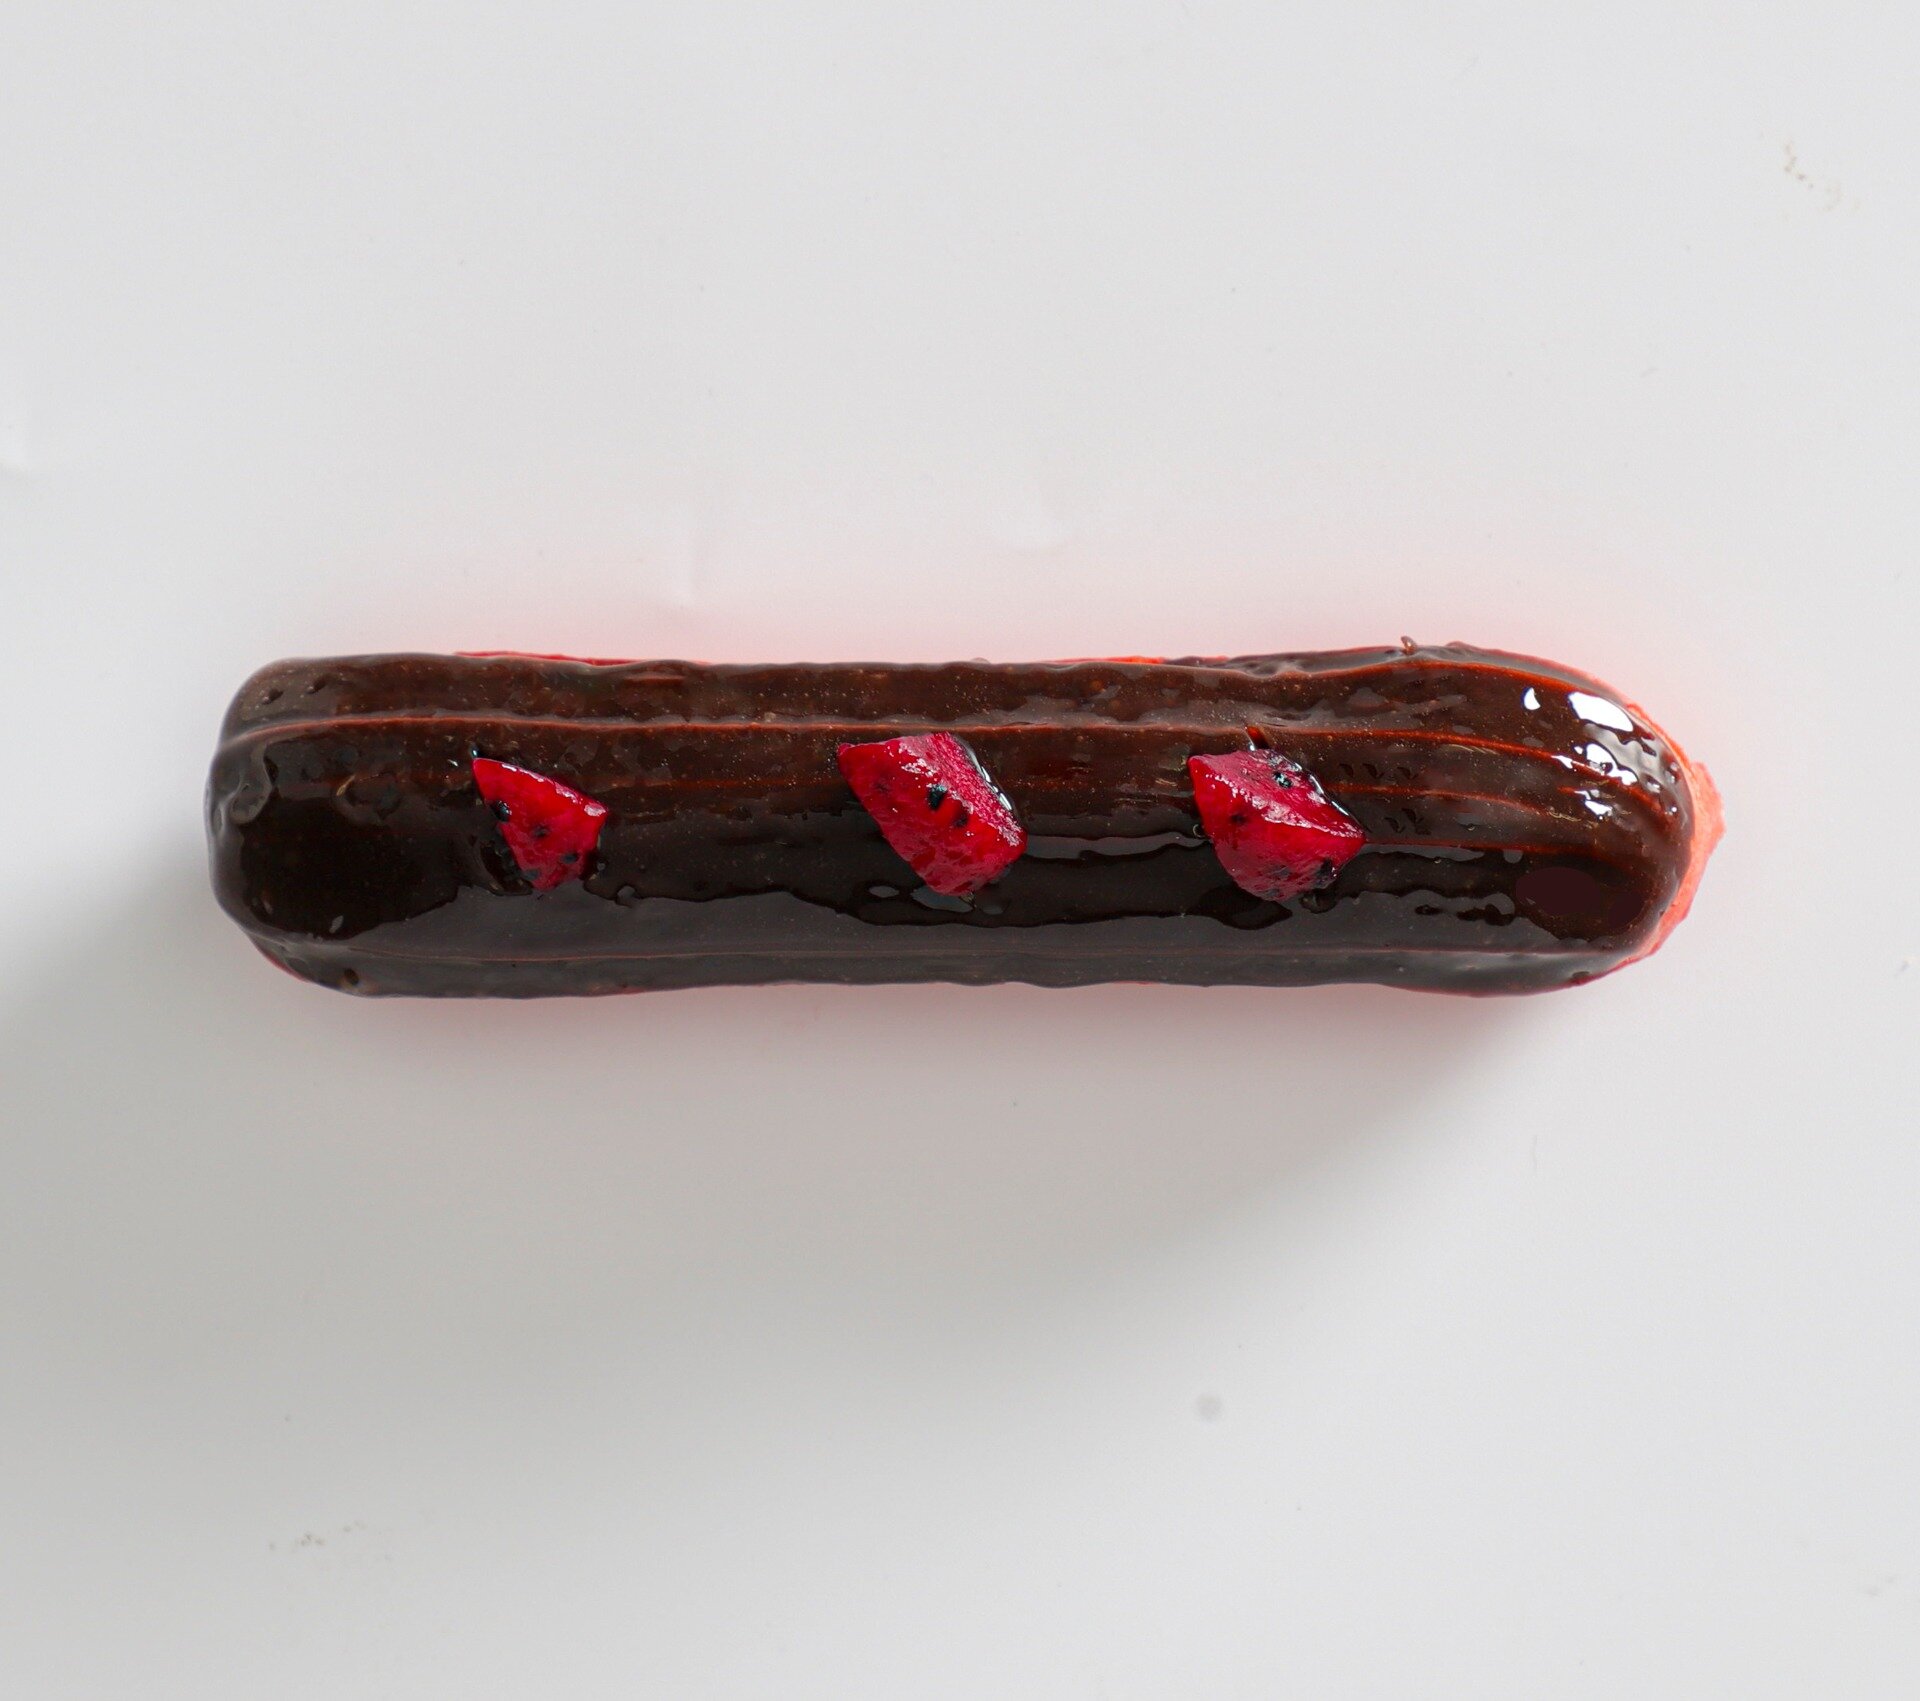 Magenta Dragon Eclair
Filled with smooth vanilla cream and topped with a deliciously decadent dark chocolate glaze and small slices of dragon fruit. Pro tip: you can alternate between white and pink varieties of the fruit to add a stunning contrast.
